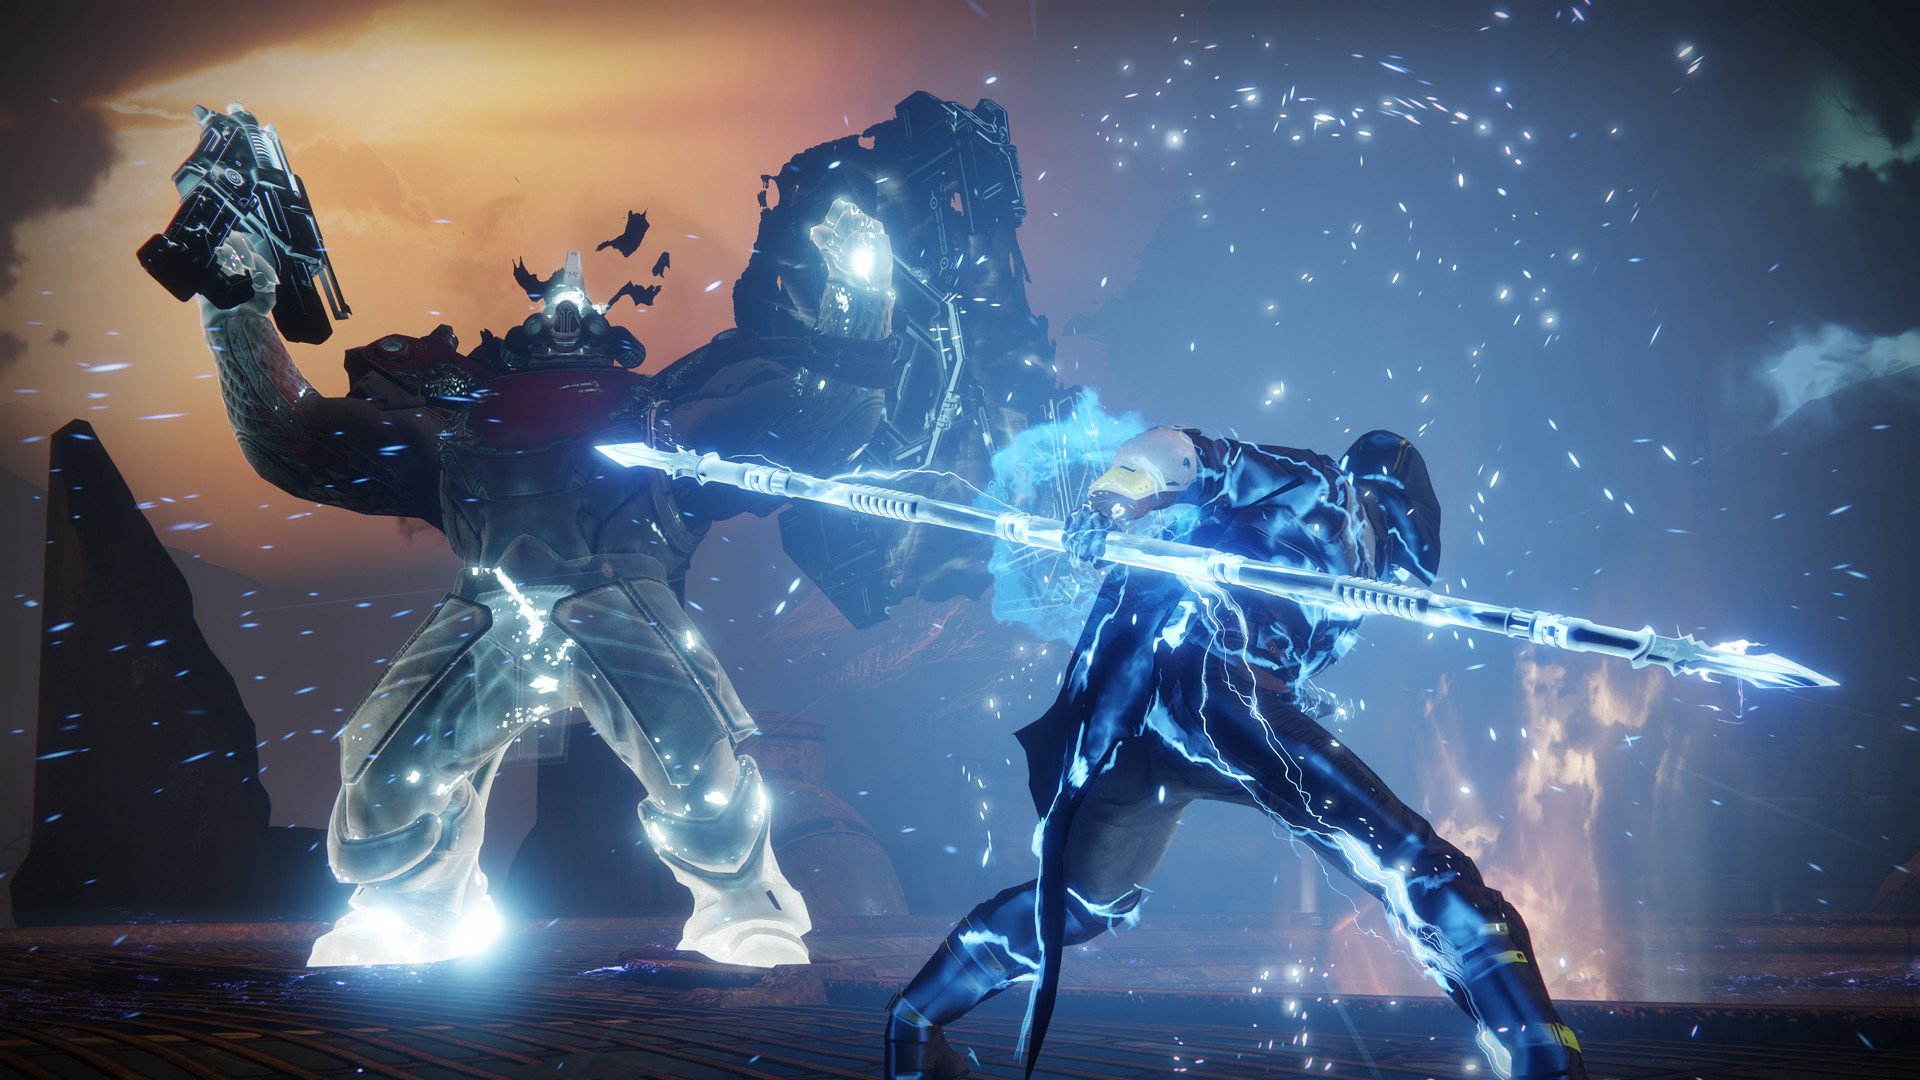 Destiny 2 Might Be Coming to Xbox Game Pass on PC, According to New Leak – Gameranx